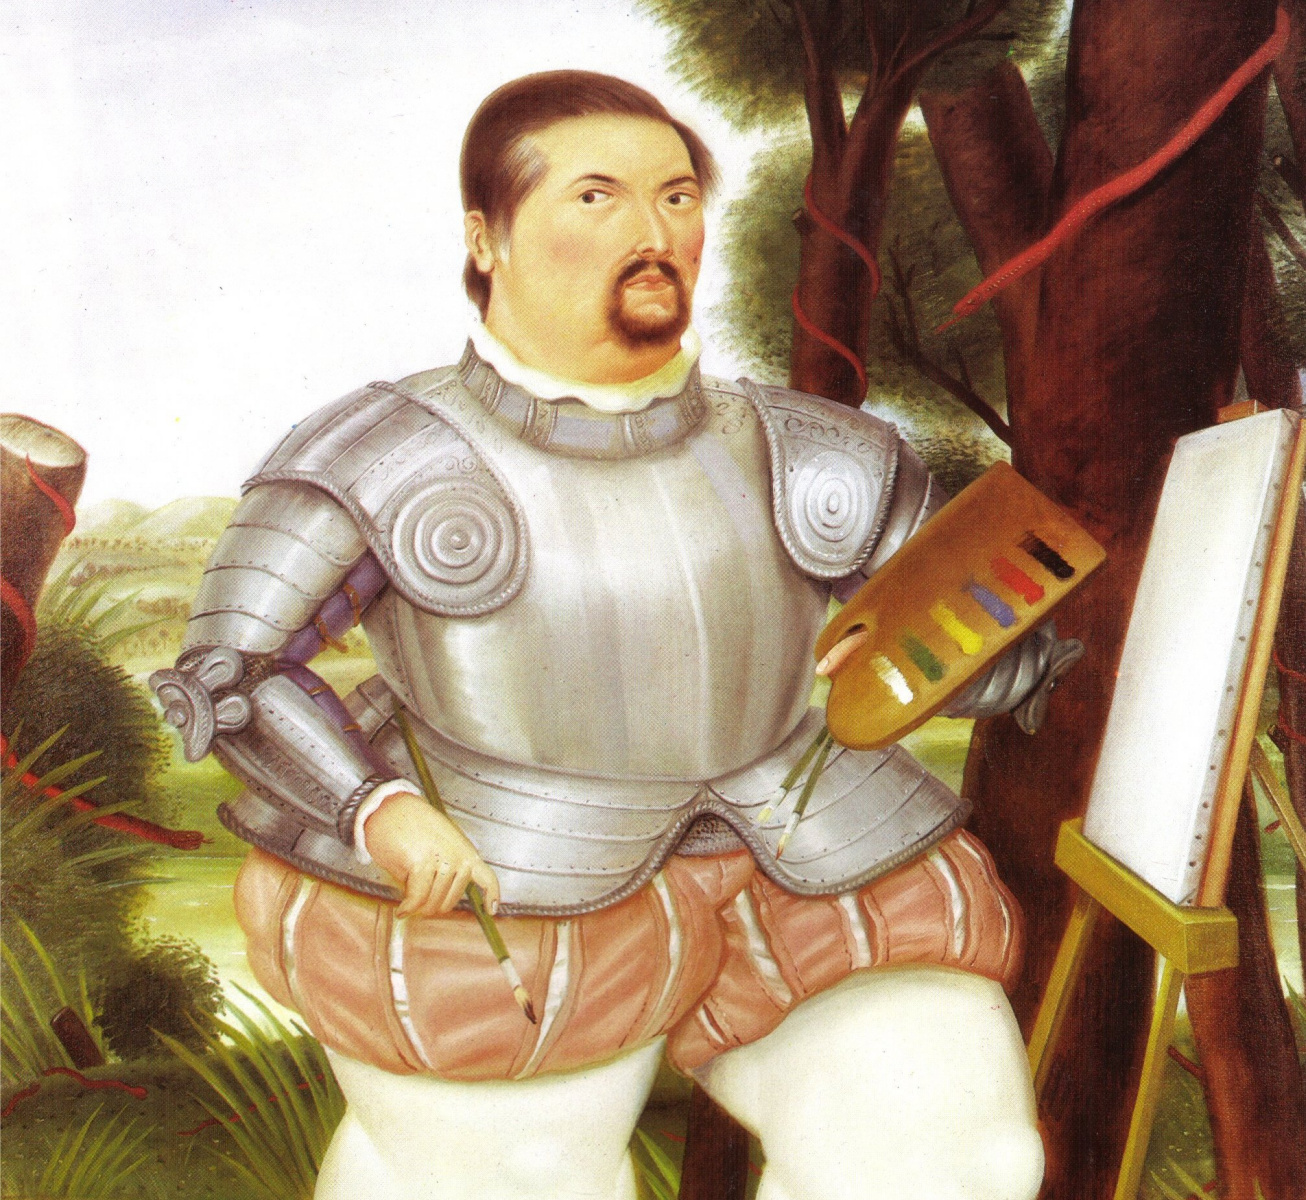 Botero turns 85! Ten facts about the most famous artist in Latin America